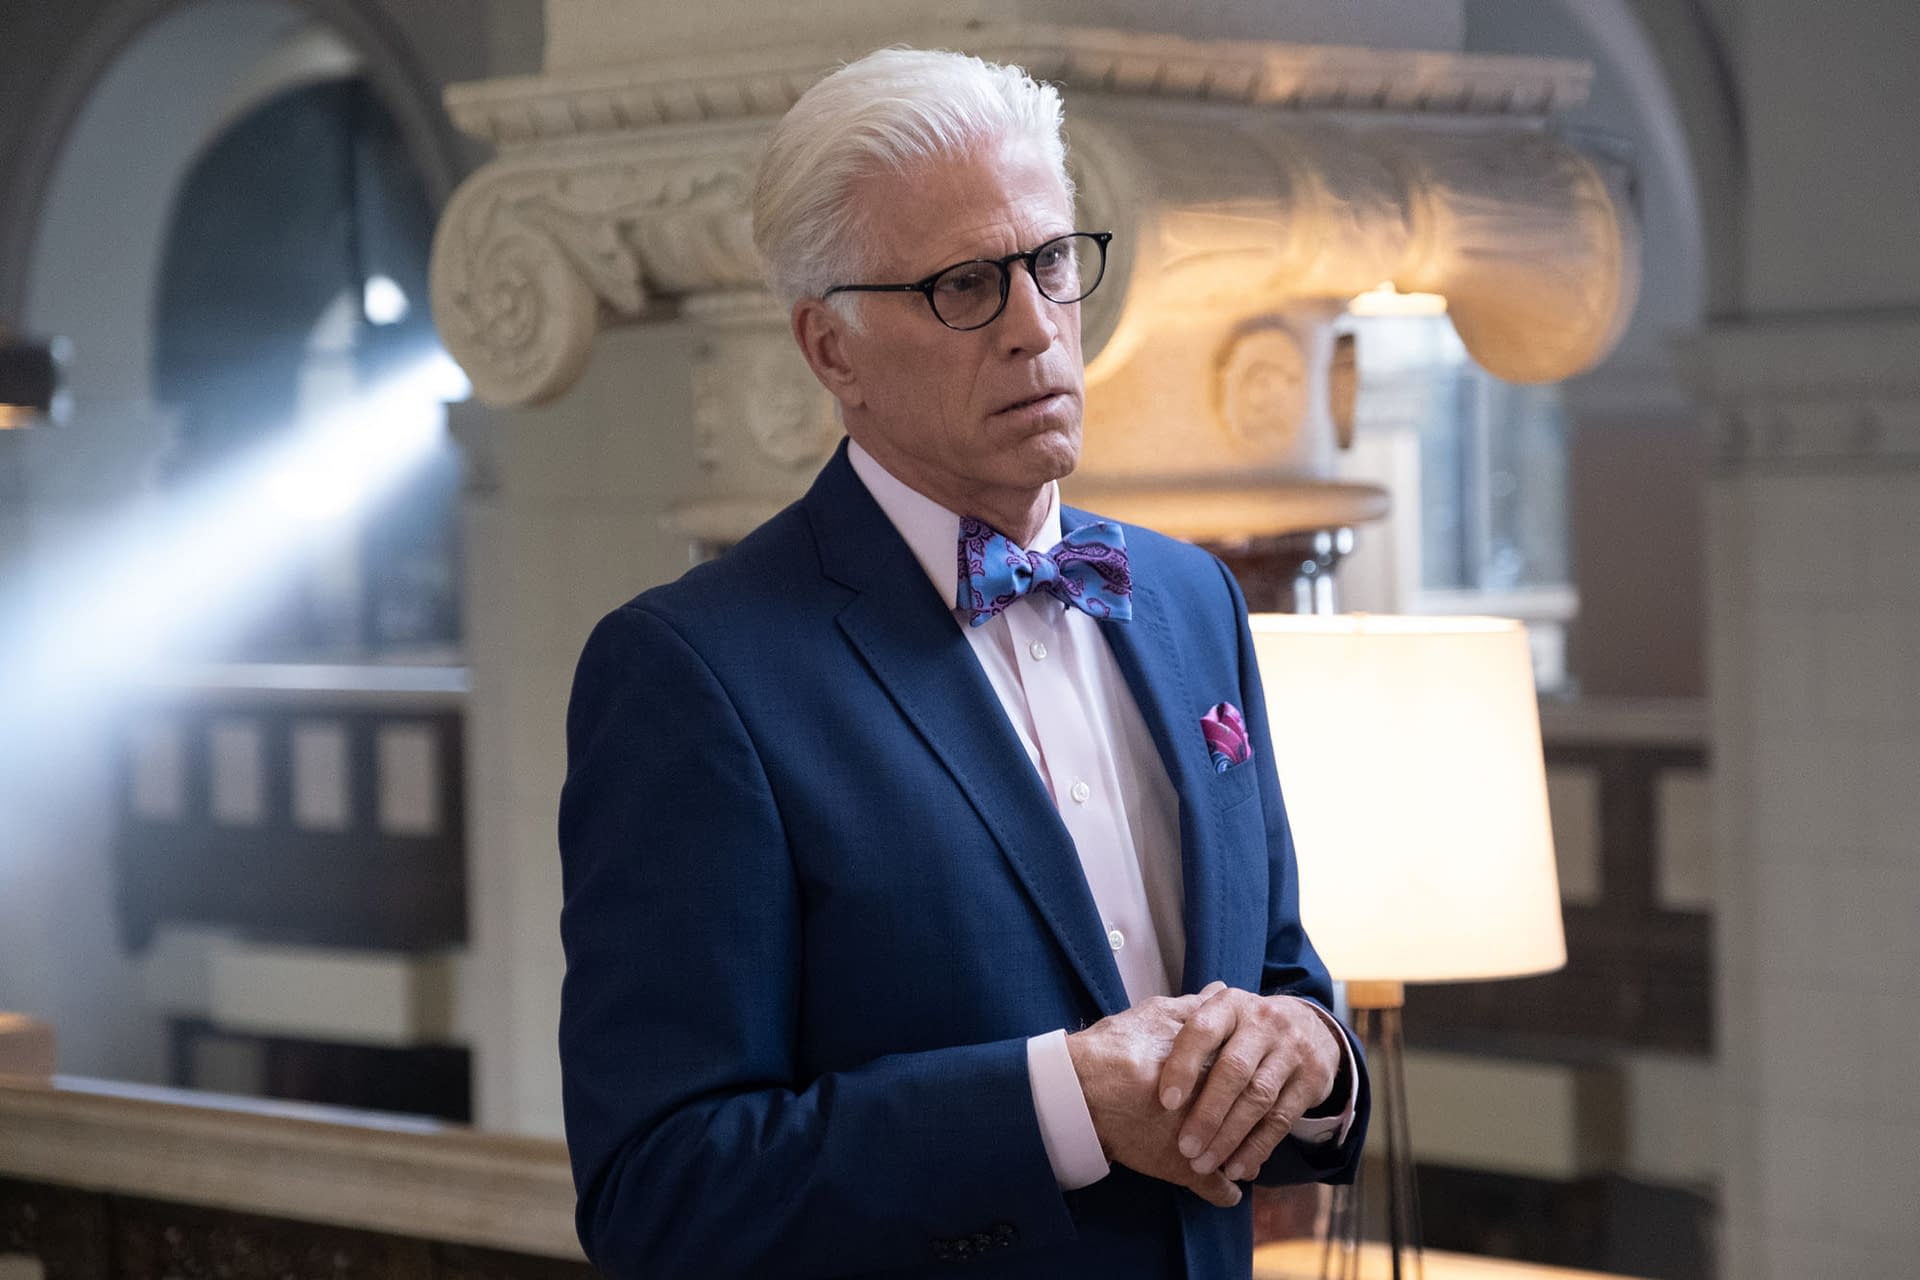 The Good Place "Monday's, am I right?"